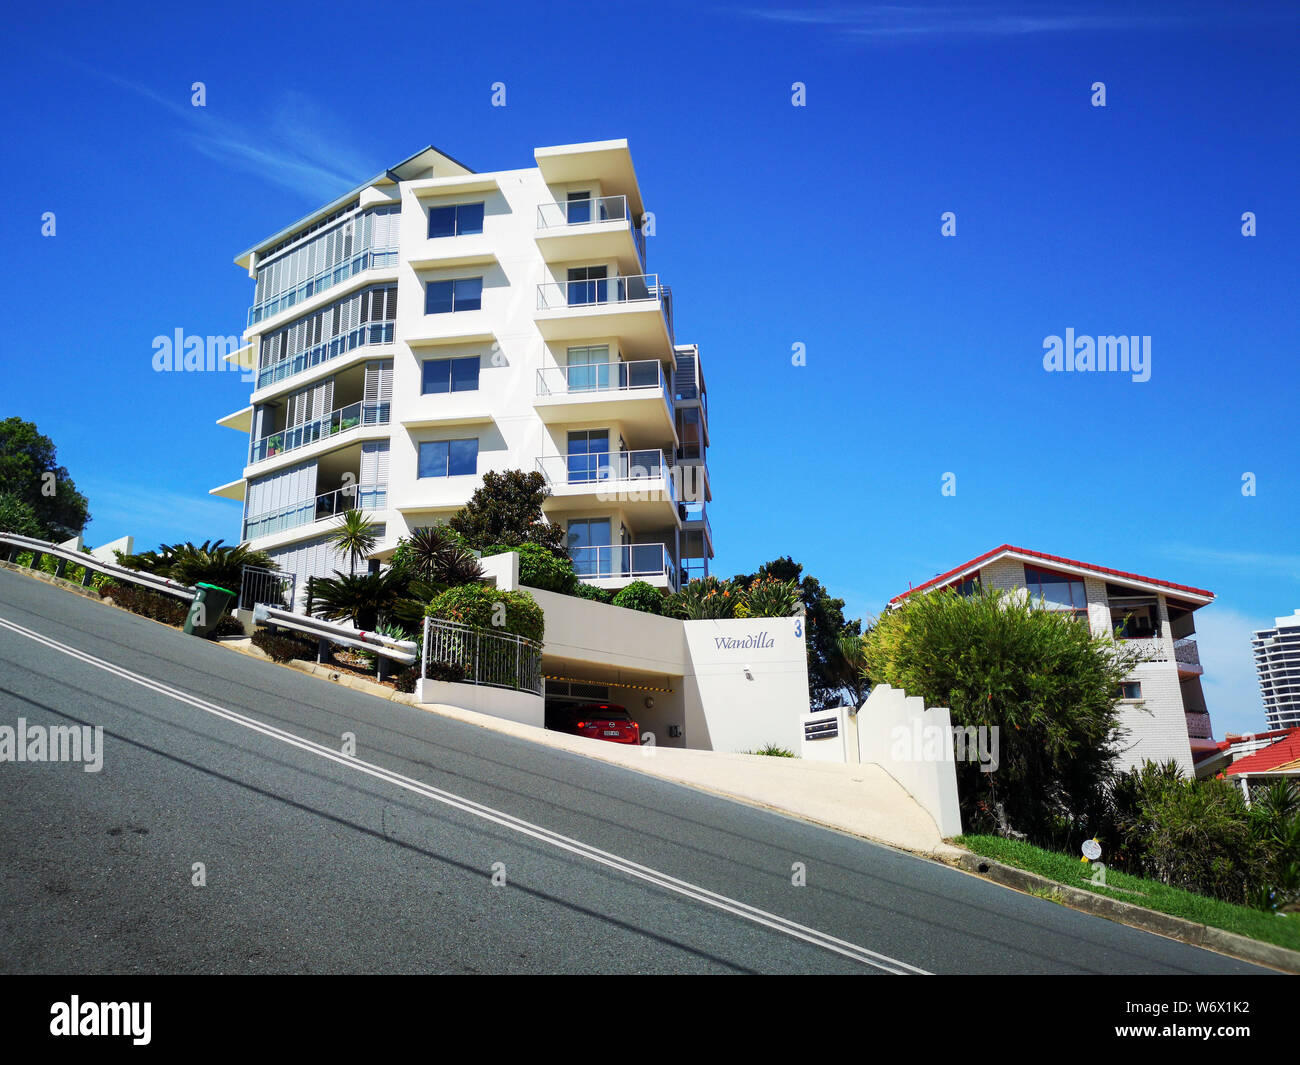 Coolangatta, Australia: March 25, 2019: Luxury apartment building with balconies and palm trees on Hill Street, the steepest road in Coolangatta. Stock Photo